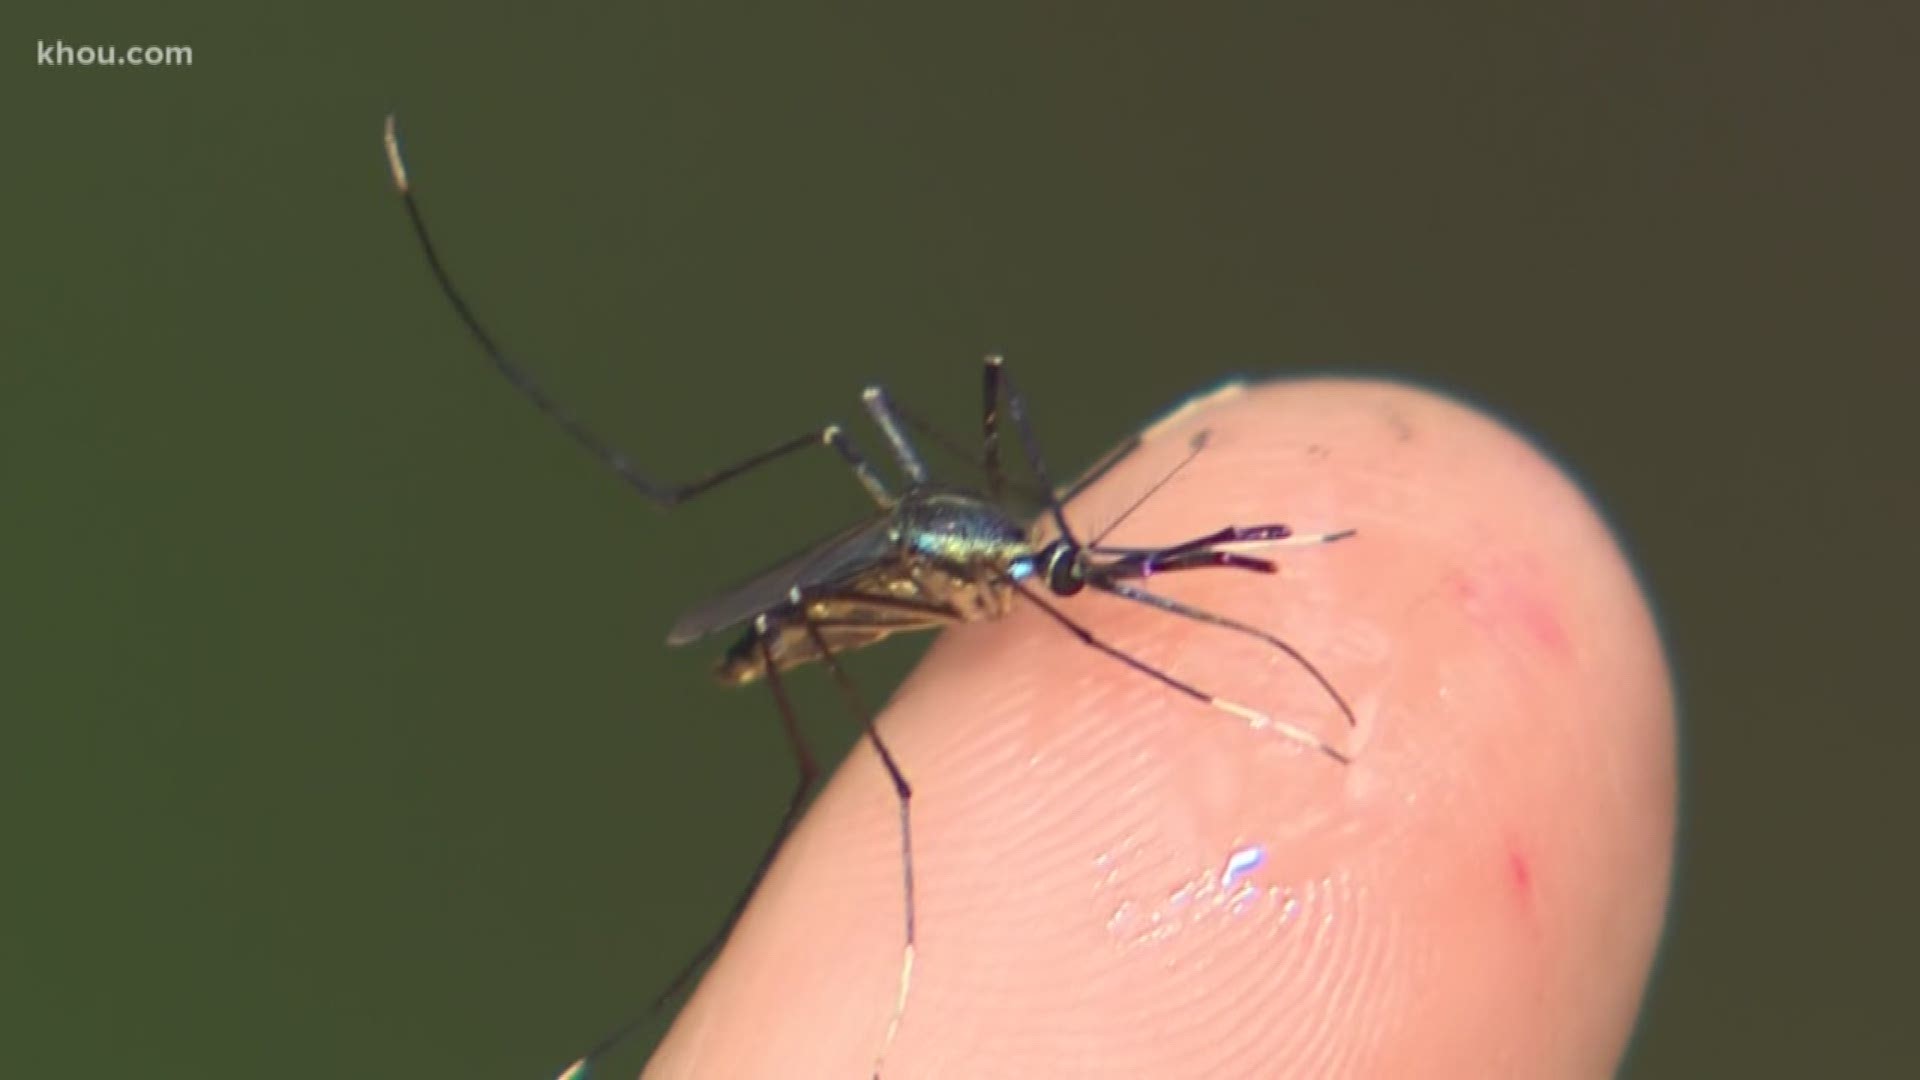 Harris County Precinct 4 and the Houston Museum of Natural Science’s Cockrell Butterfly Center are joining forces to study the results of launching “mosquito assassins” on mosquito populations in a semi-controlled environment.